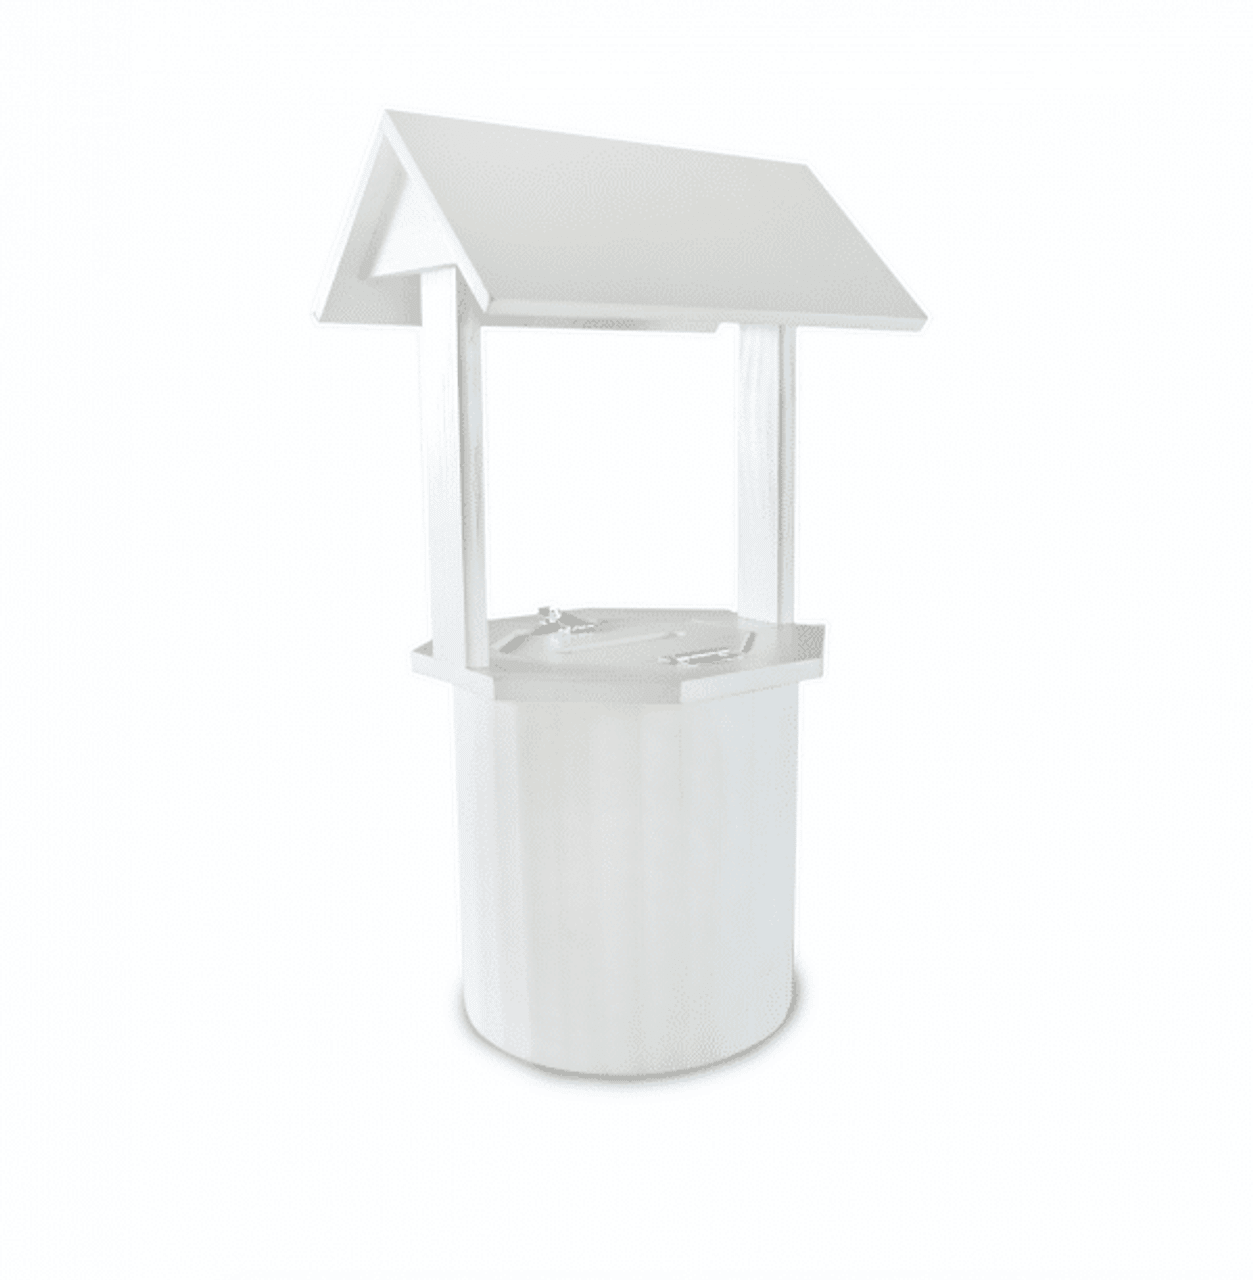 Wishing Well - with lockable lid